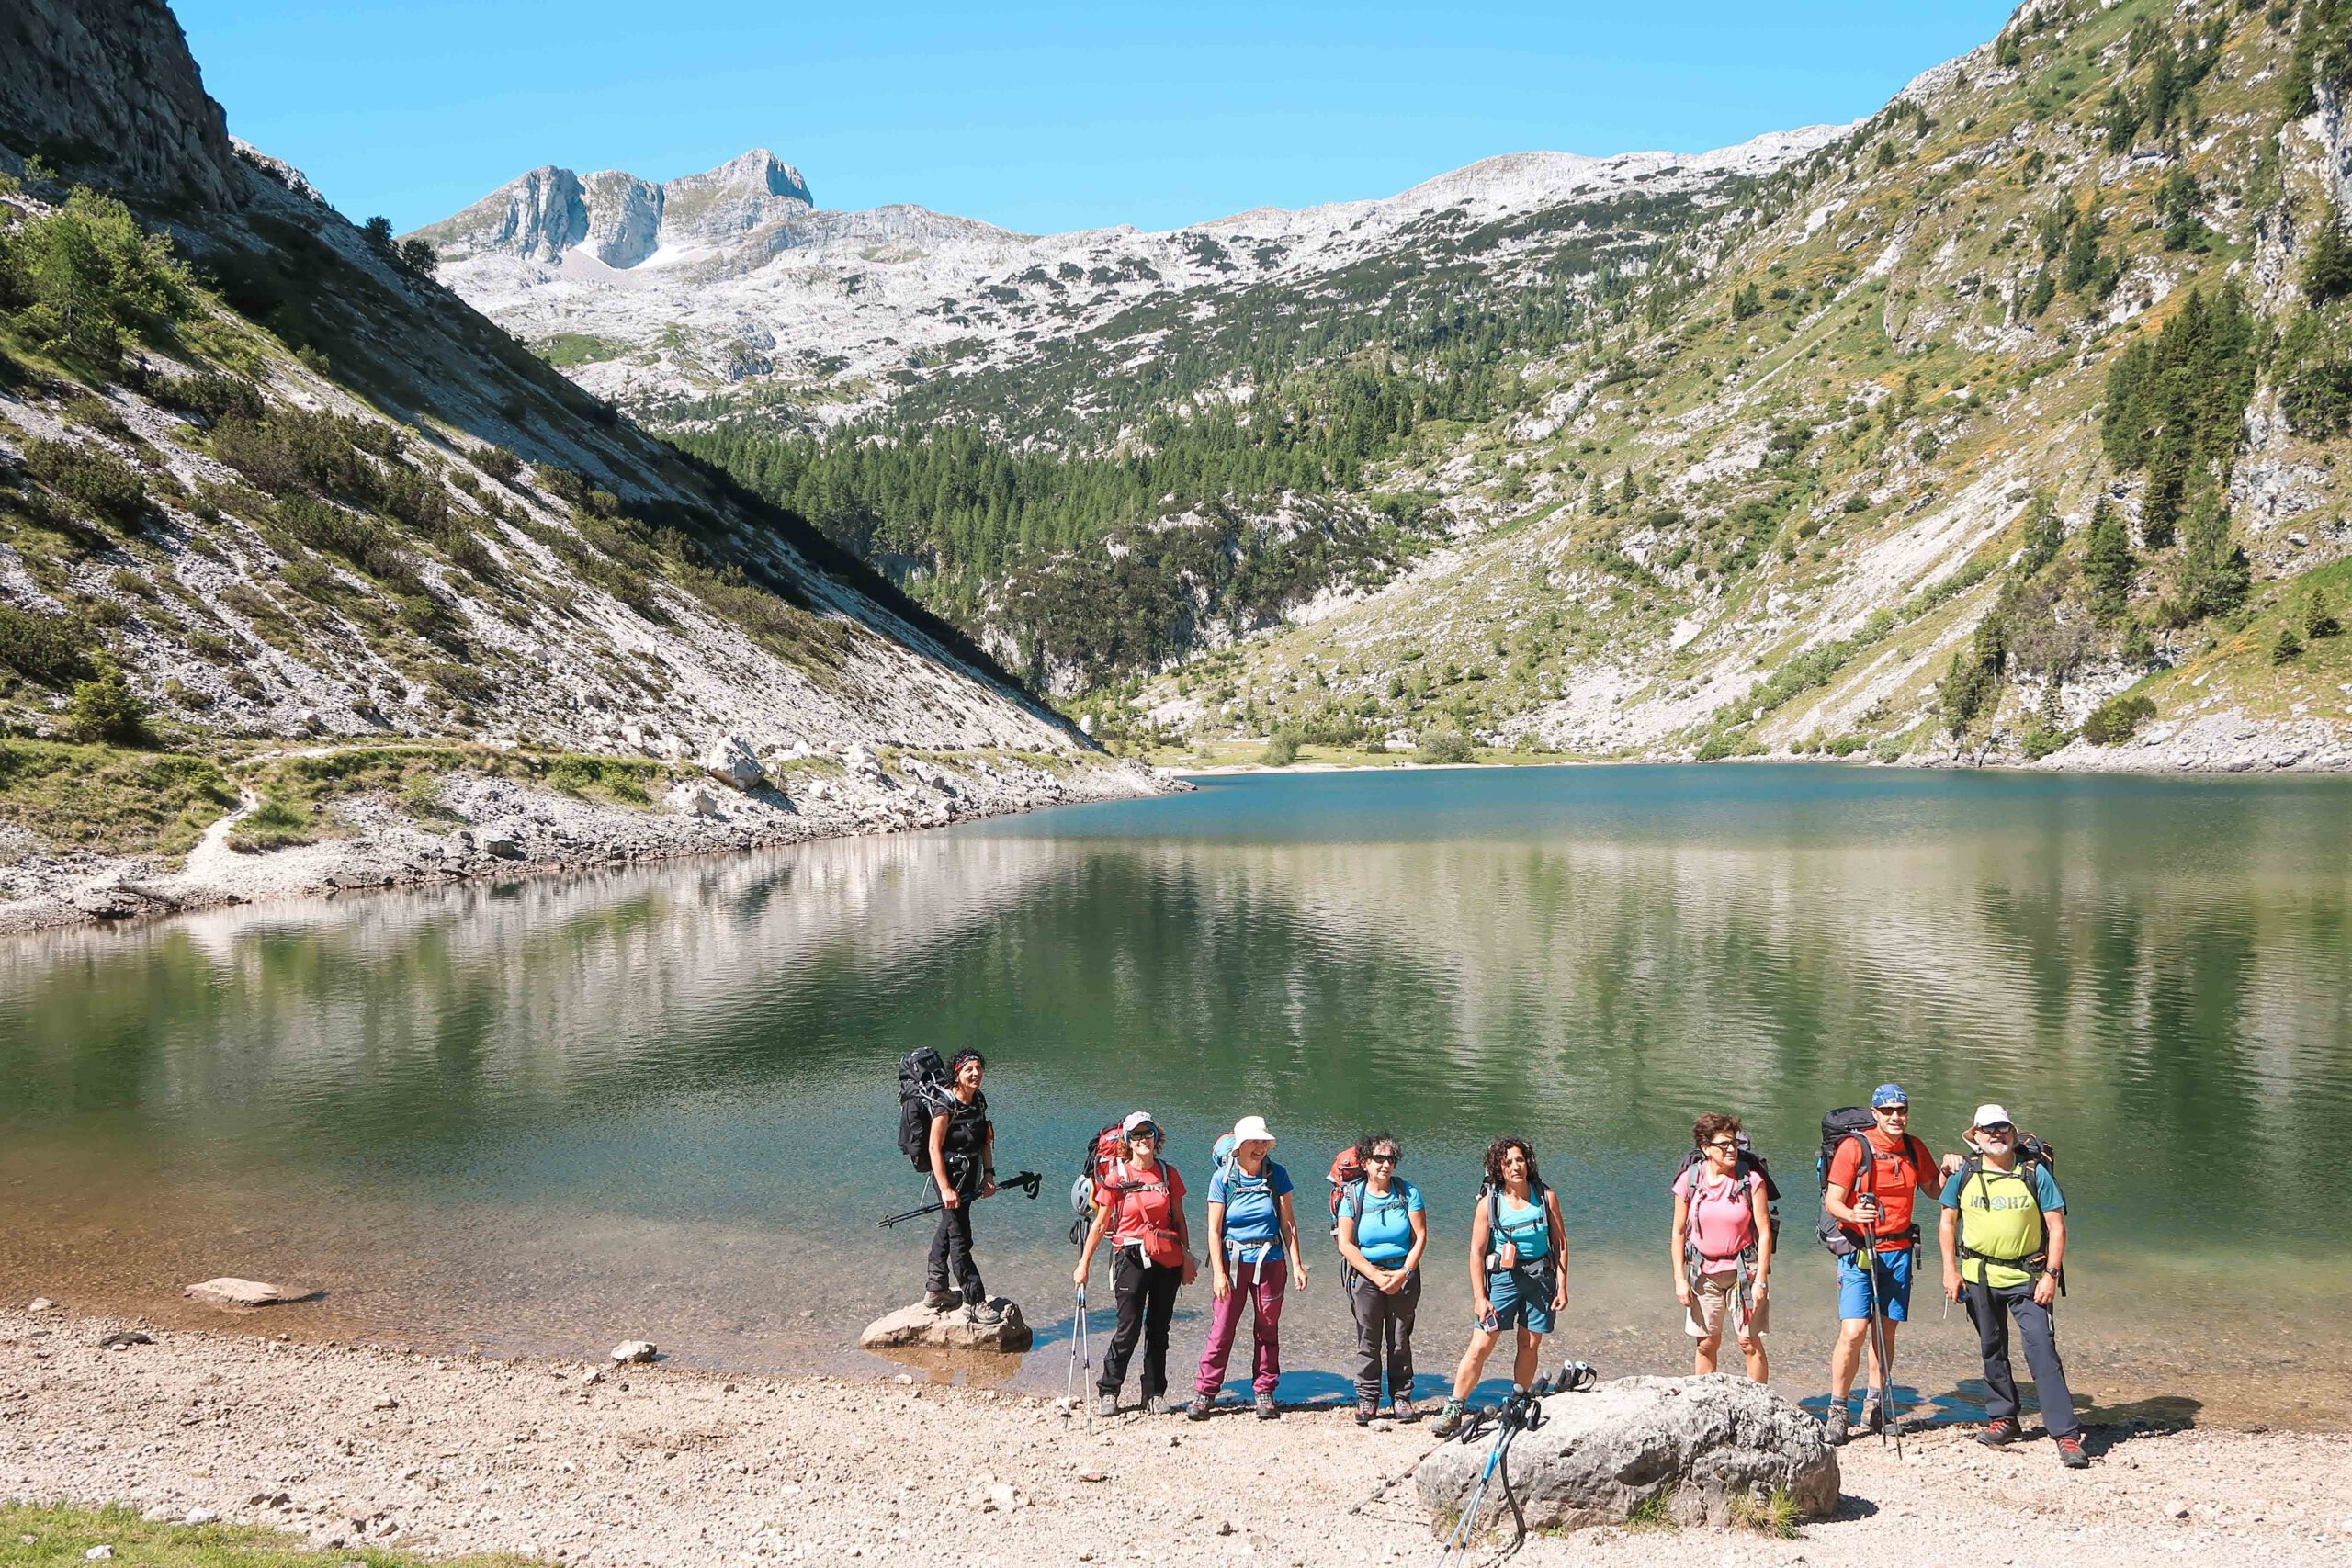 Hikers enjoying a short stop by one of the seven lakes in the Seven lakes valley on the way to Triglav.